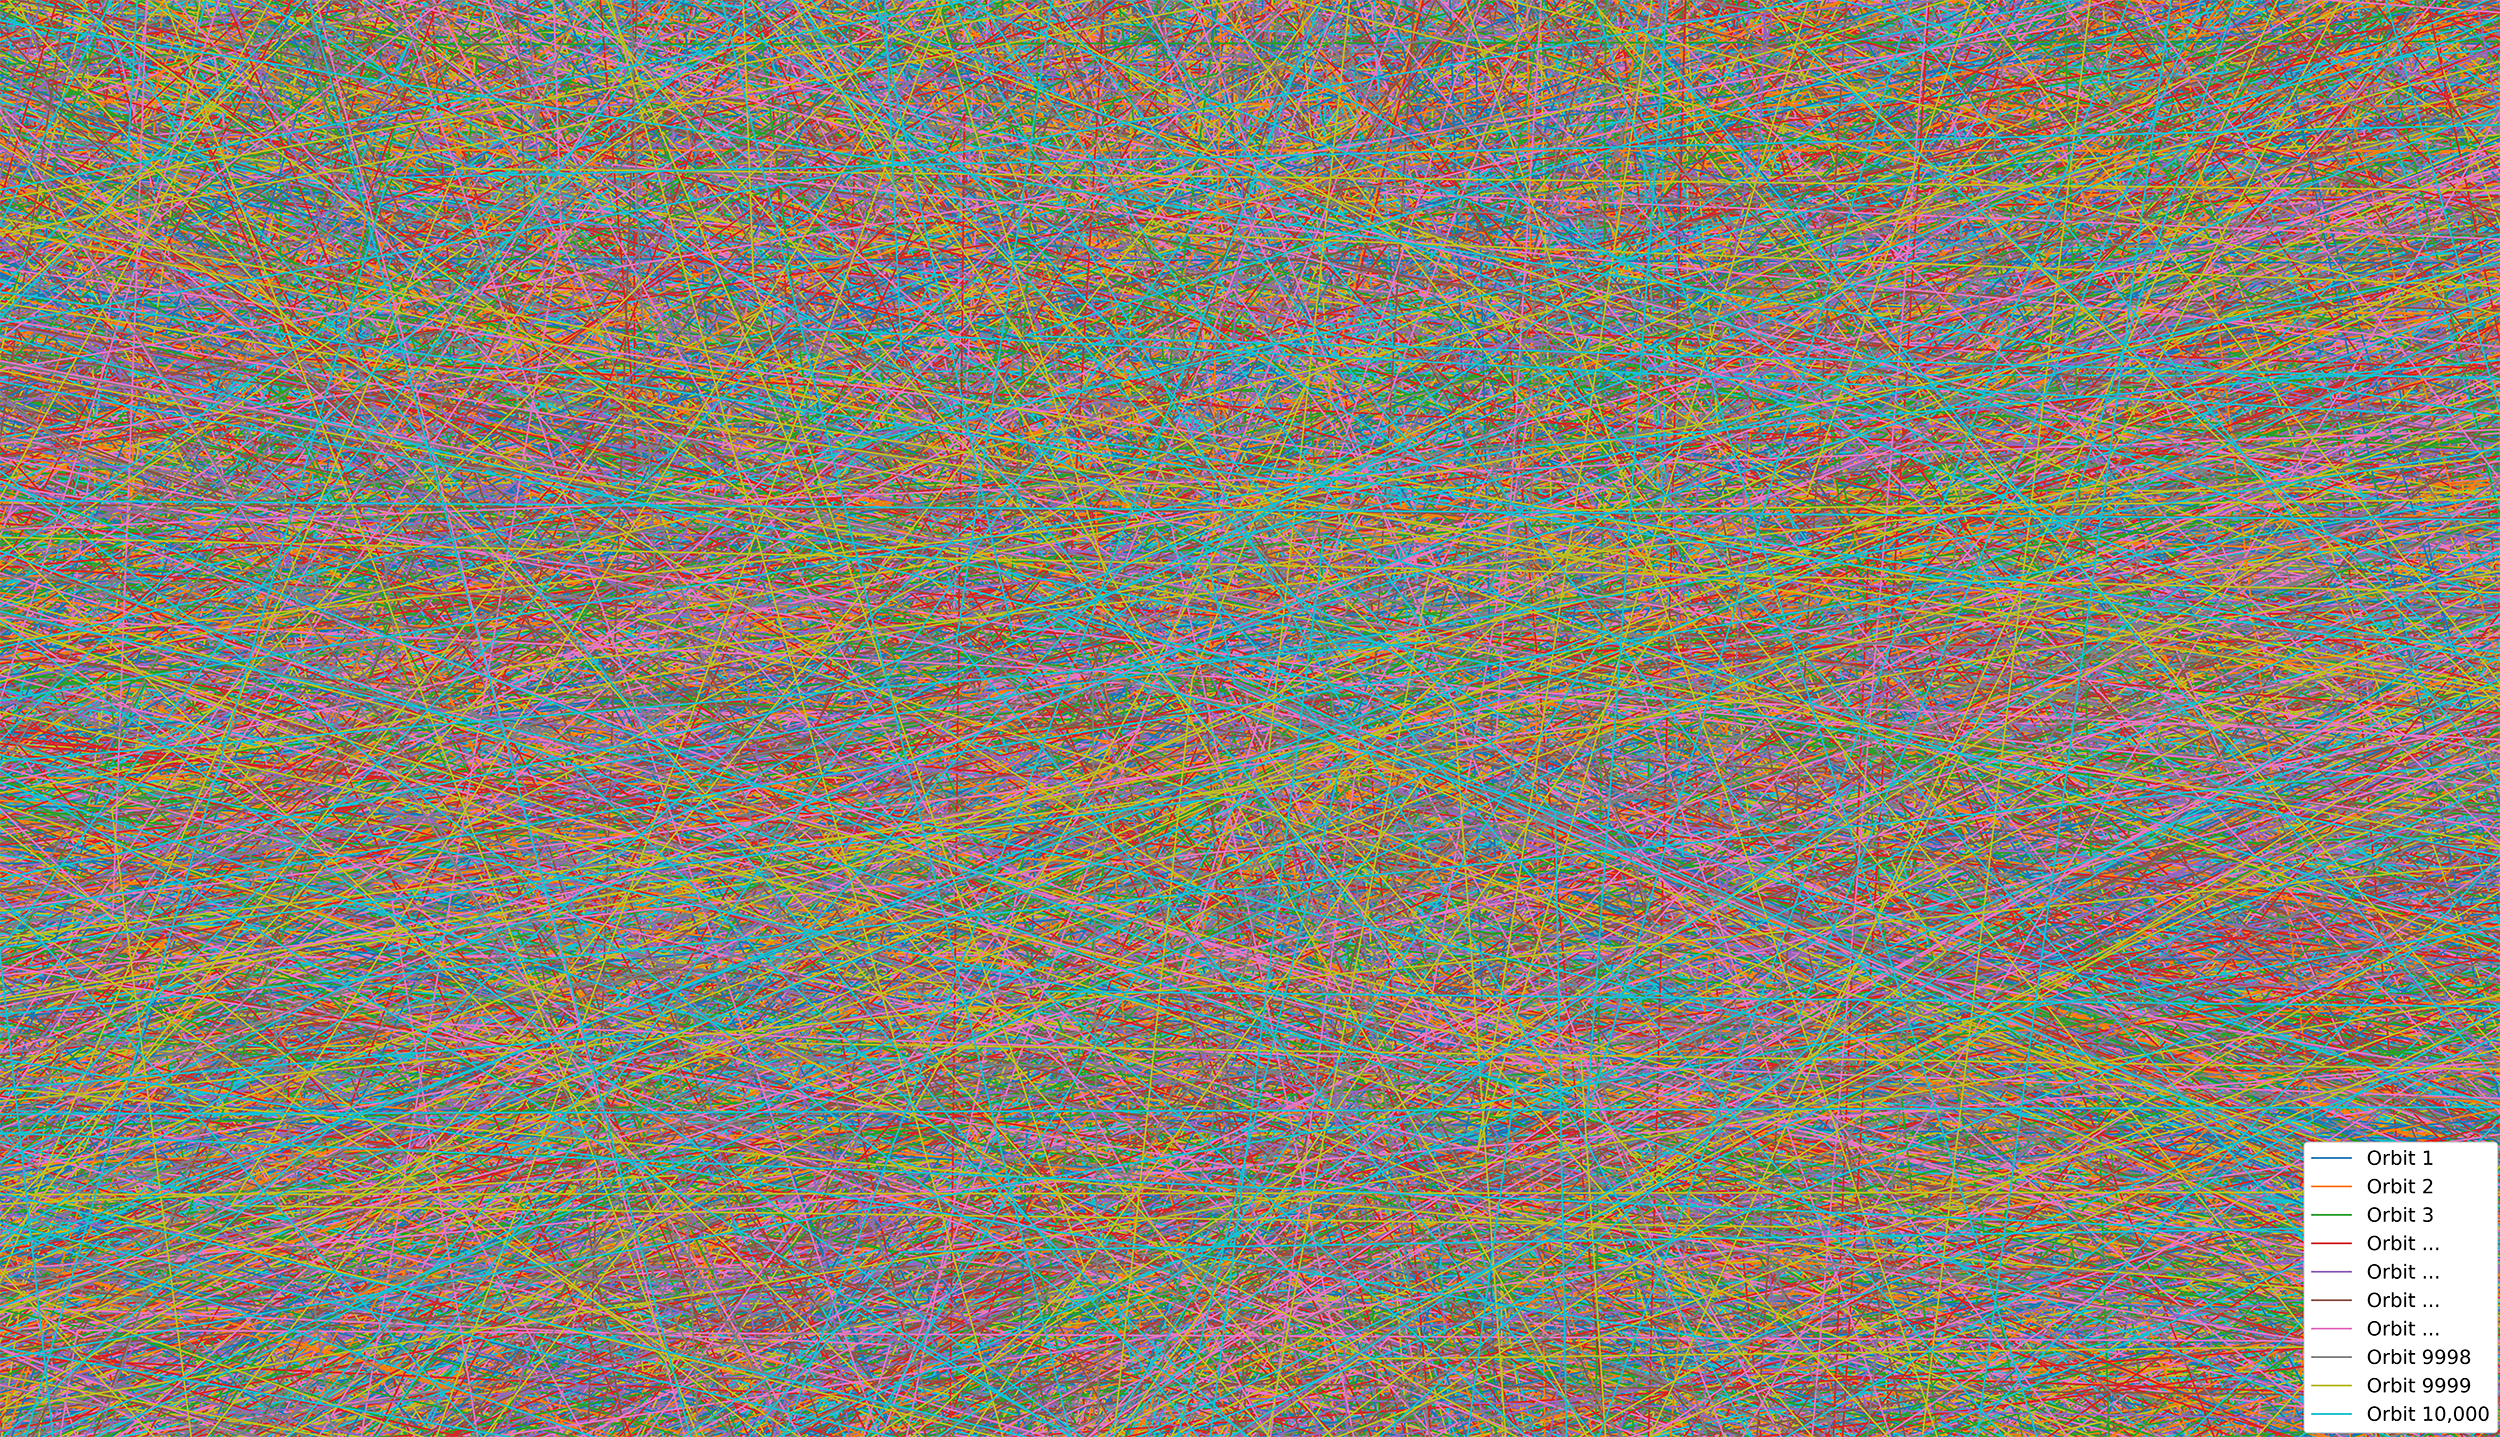 Screen shot of a computer generated plot. Countless, overlapping, multi-coloured orbits fill every space in the rectangular image. Cyan, orange, red, green and magenta are prevalent.